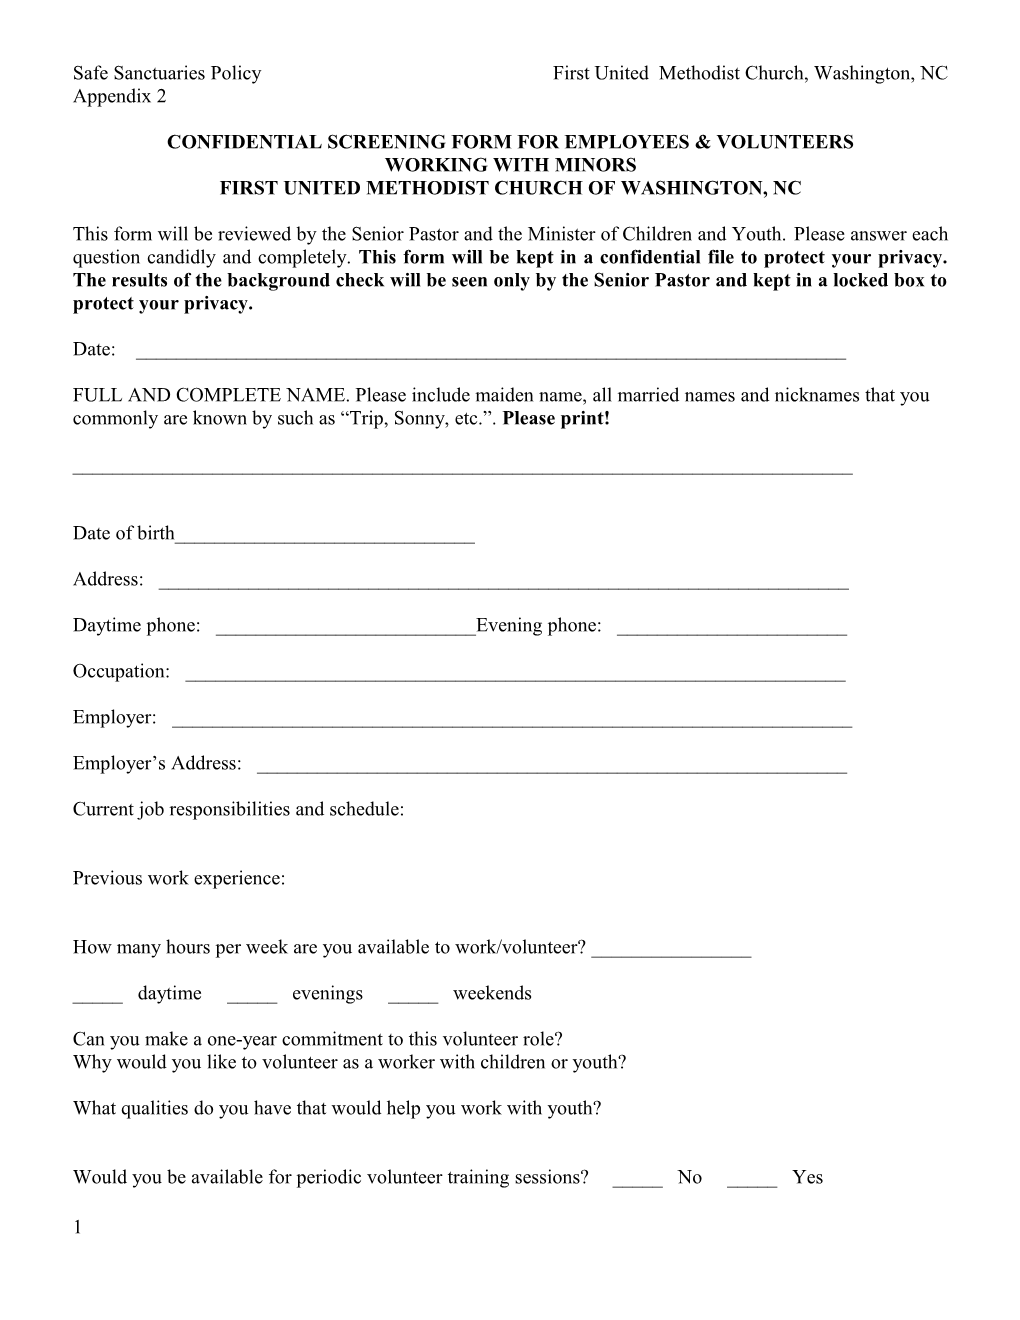 Confidential Screening Form for Employees & Volunteers